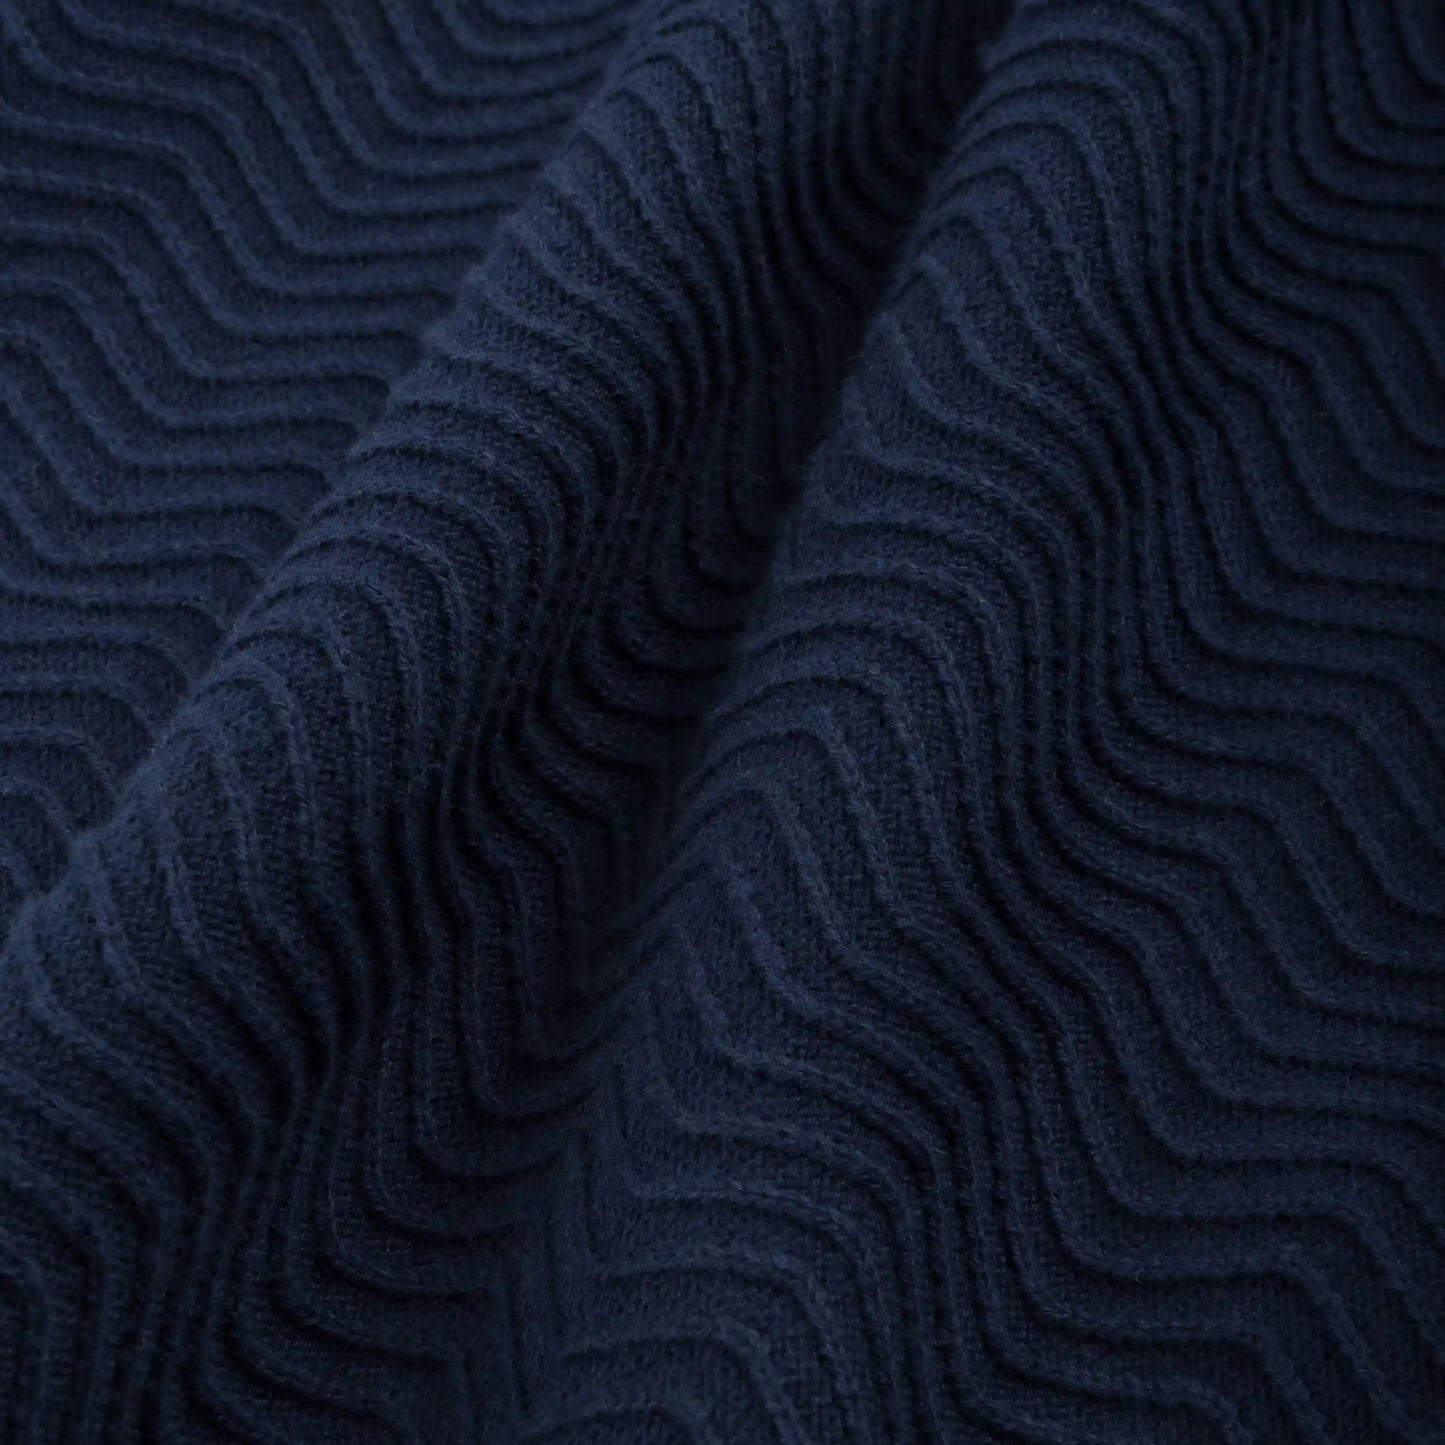 Dime Wave Cable Knit Polo, navy - Tiki Room Skateboards - 3